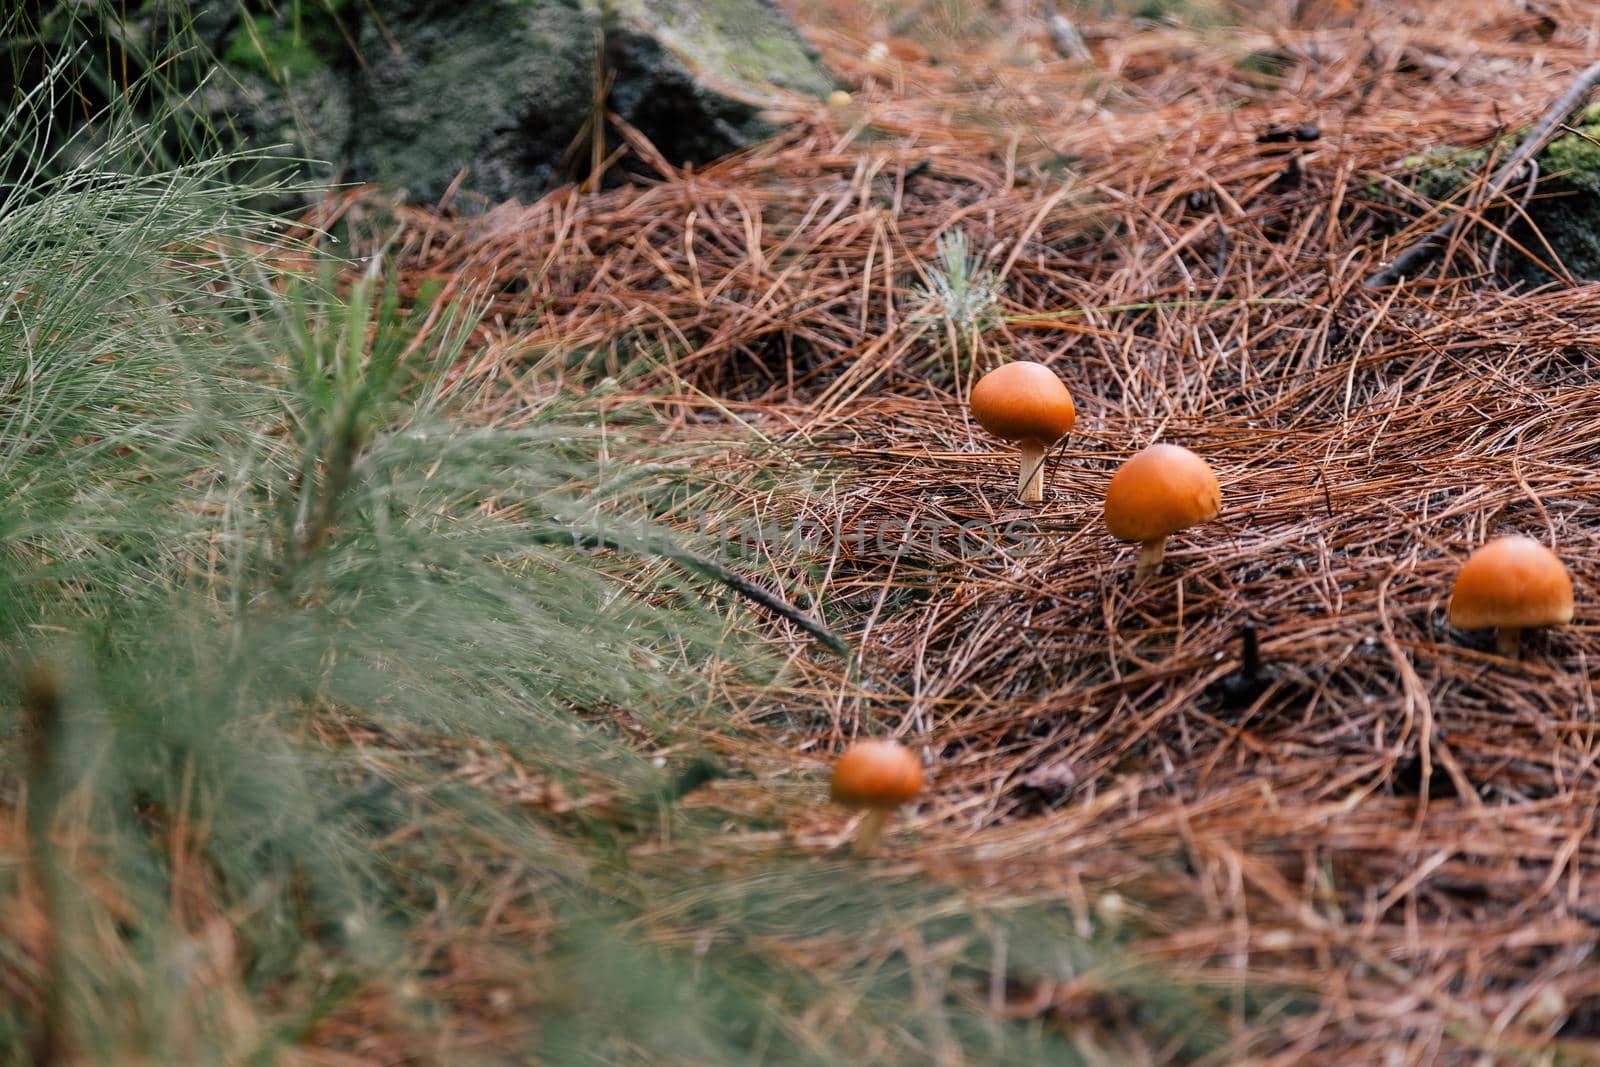 Few poisonous inedible mushrooms among dry needles in a forest with blurred tree branch at the foreground. by apavlin